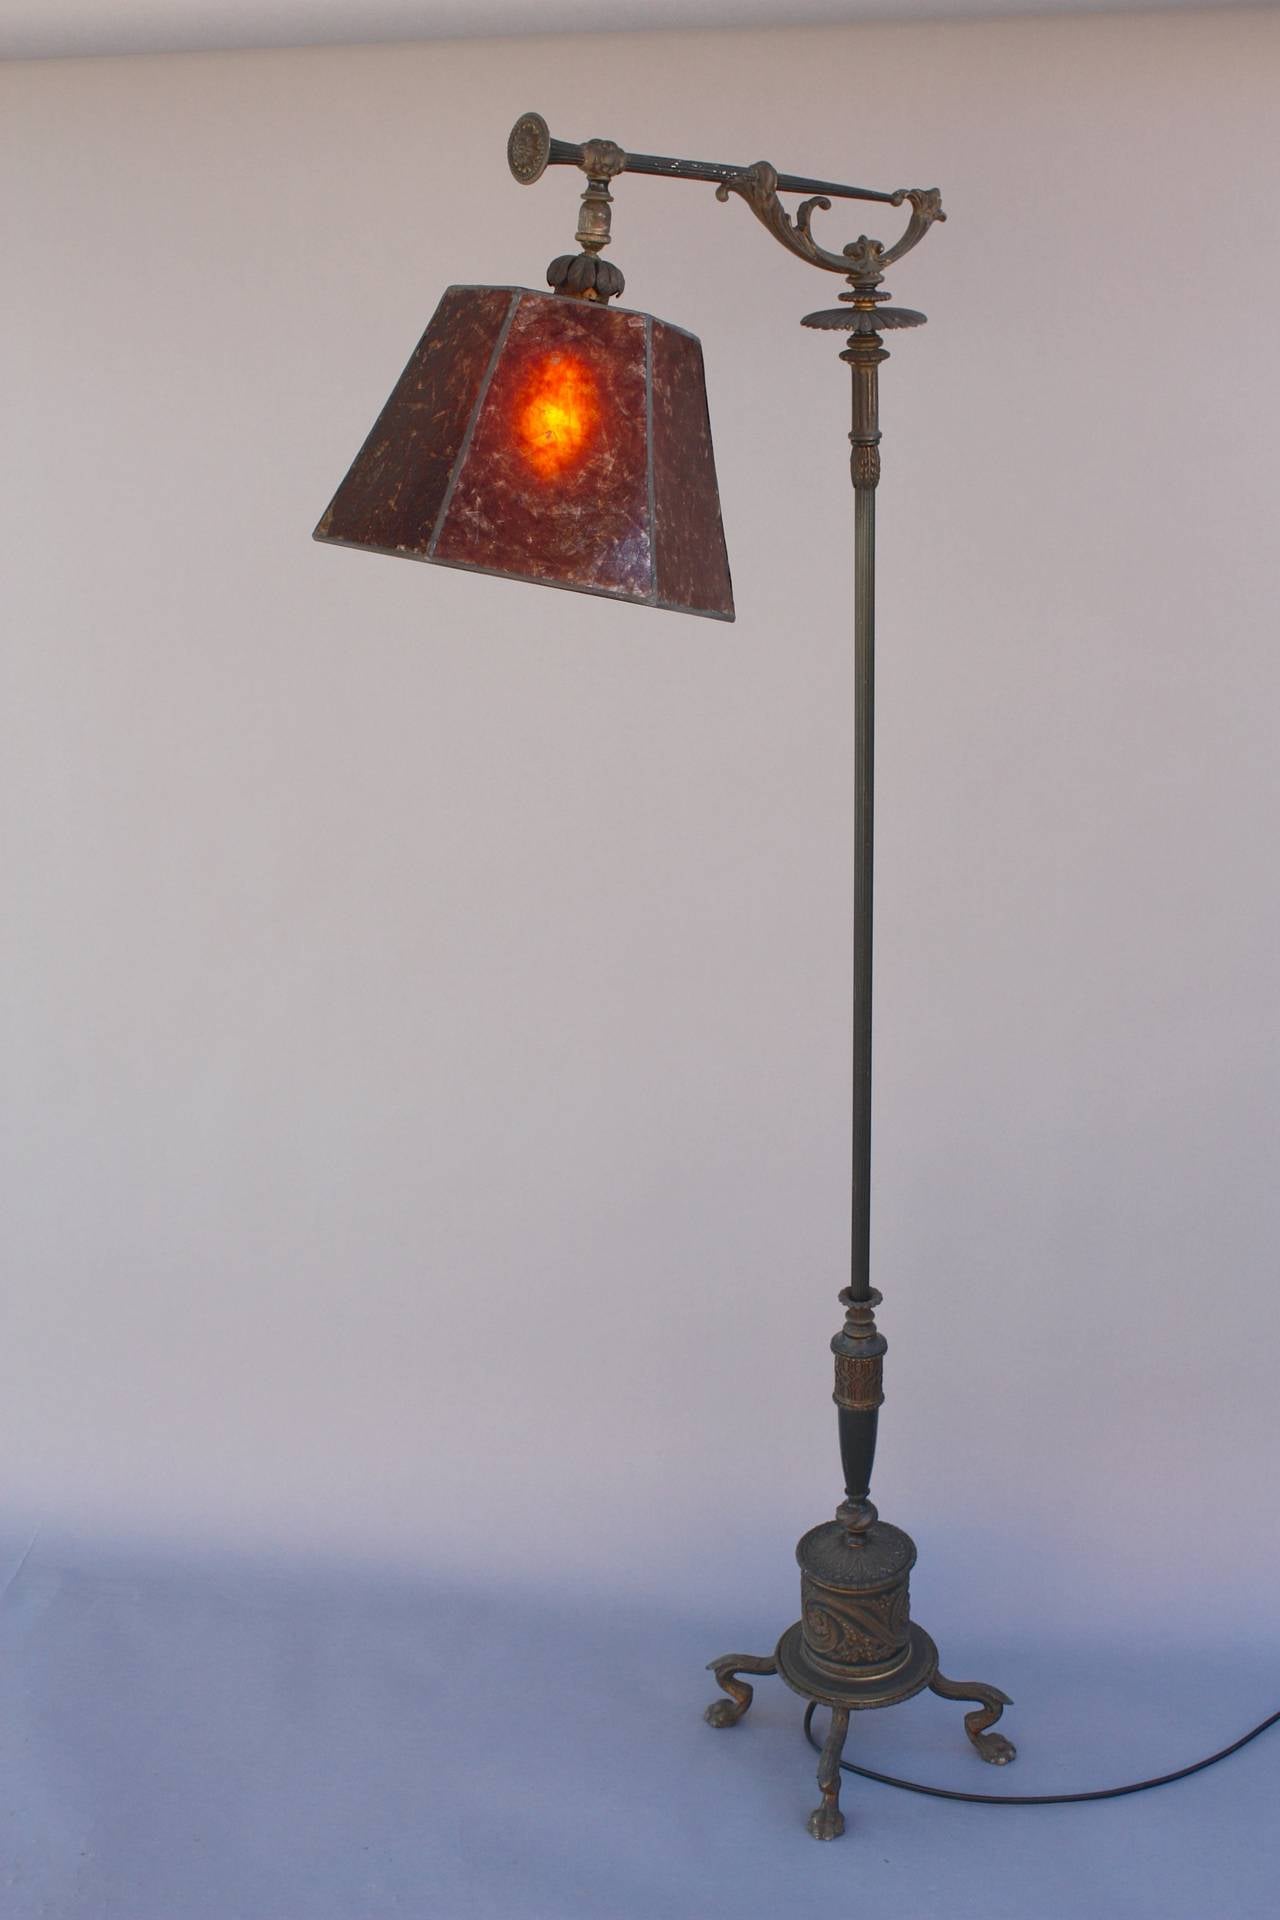 Circa 1920's lamp with new mica shade. Beautiful casting-work on base. 59